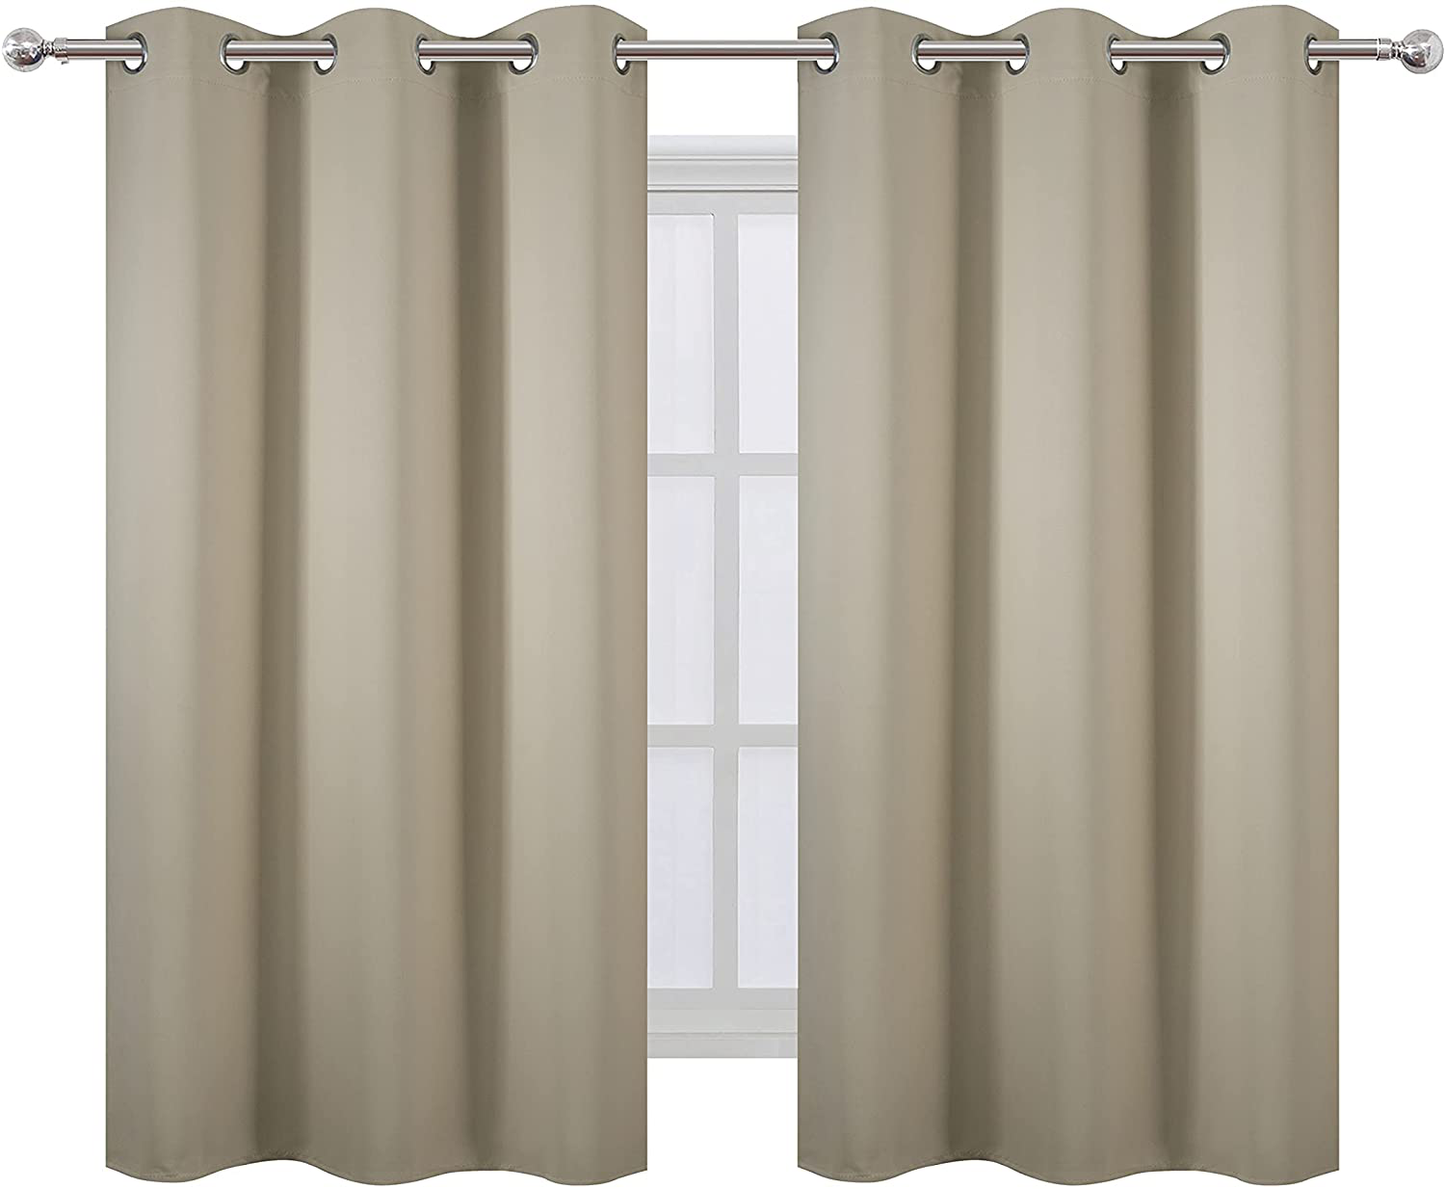 LEMOMO Black Blackout Curtains 52 x 63 Inch Length/Set of 2 Curtain Panels/Thermal Insulated Room Darkening Curtains for Bedroom and Living Room